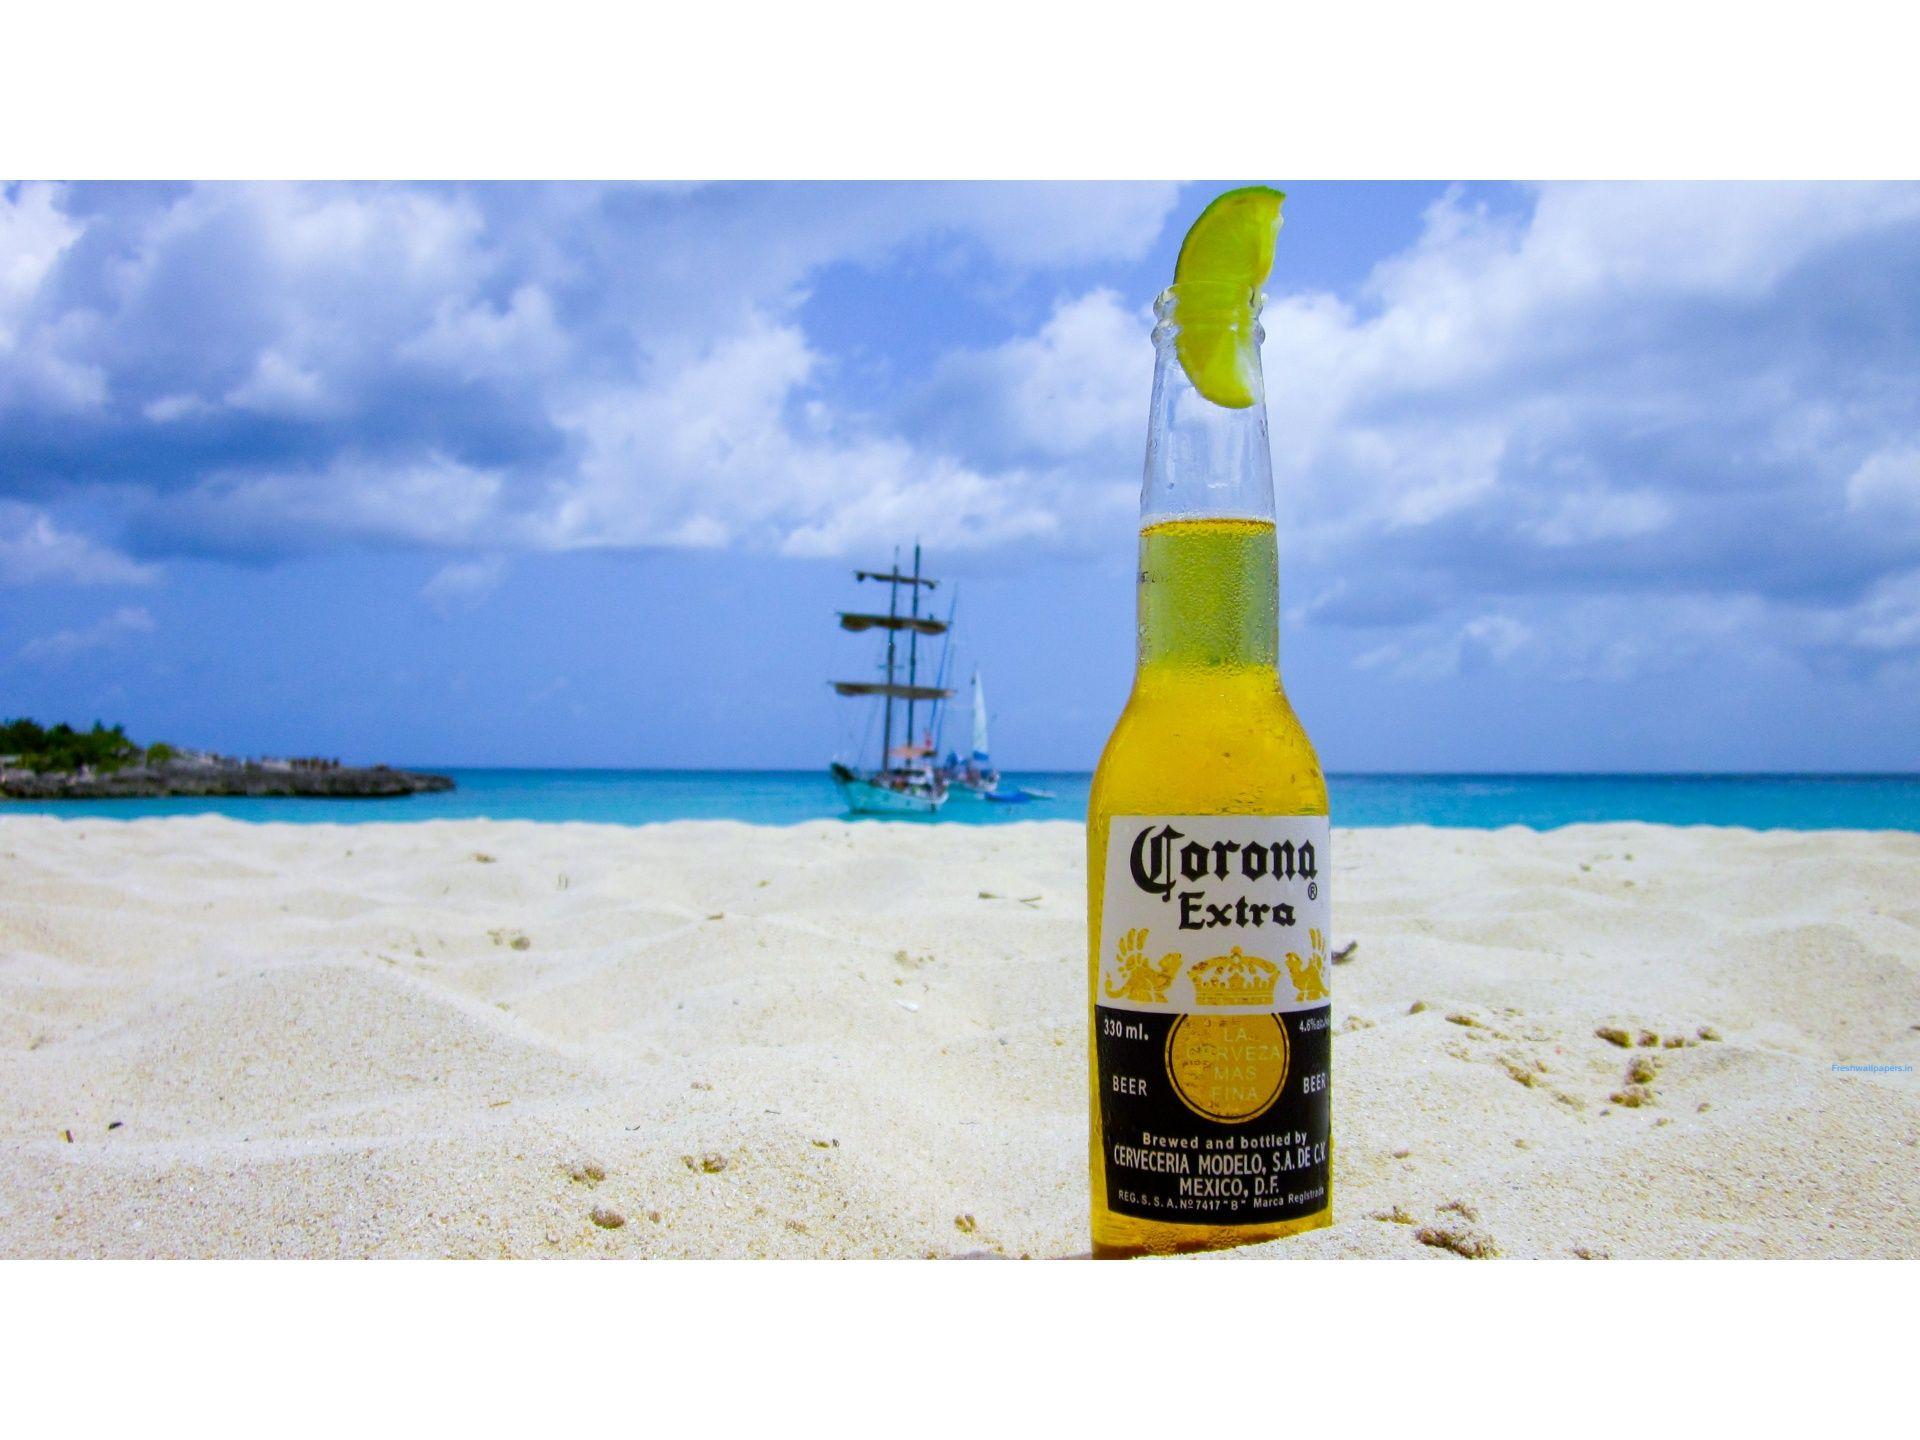 Cold Corona in the hot sand wallpaper